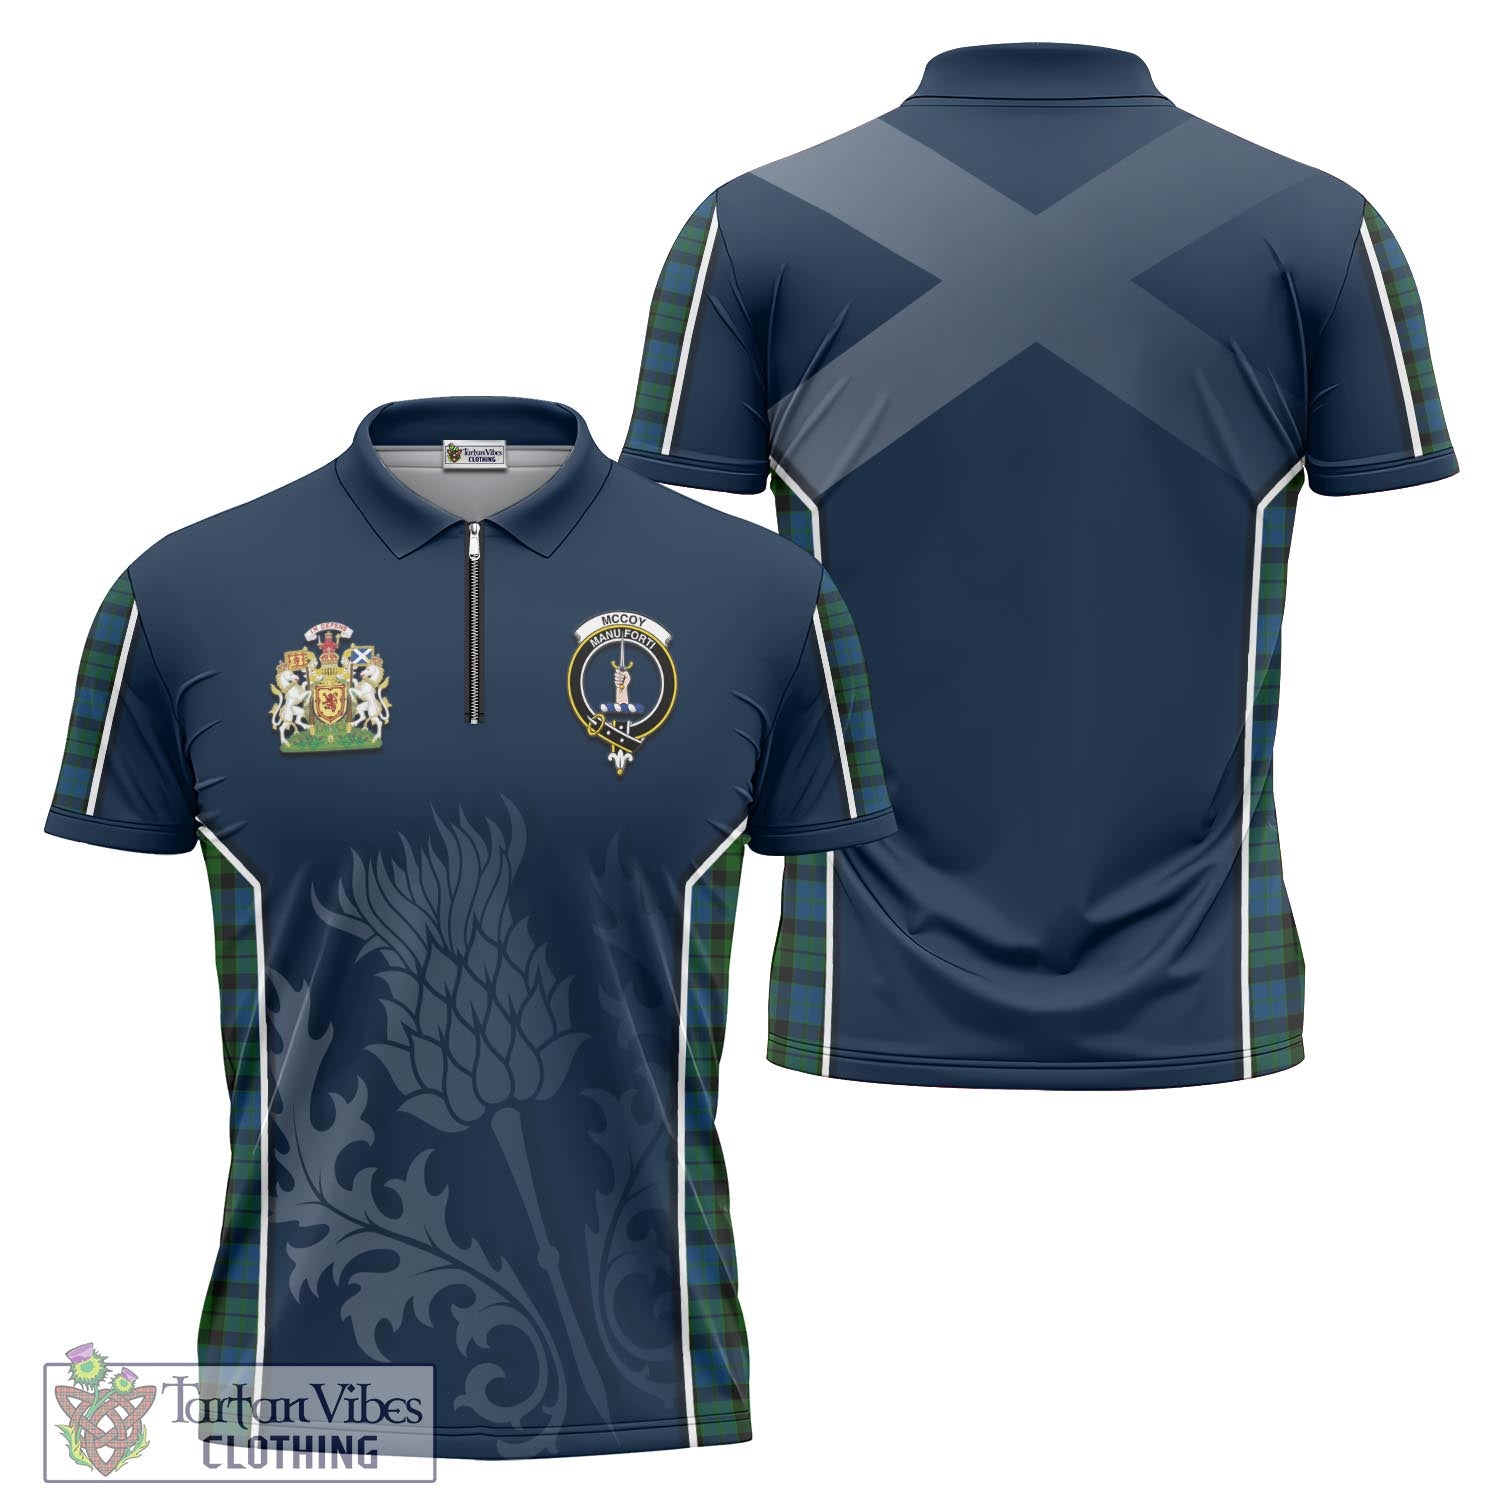 Tartan Vibes Clothing McCoy Tartan Zipper Polo Shirt with Family Crest and Scottish Thistle Vibes Sport Style